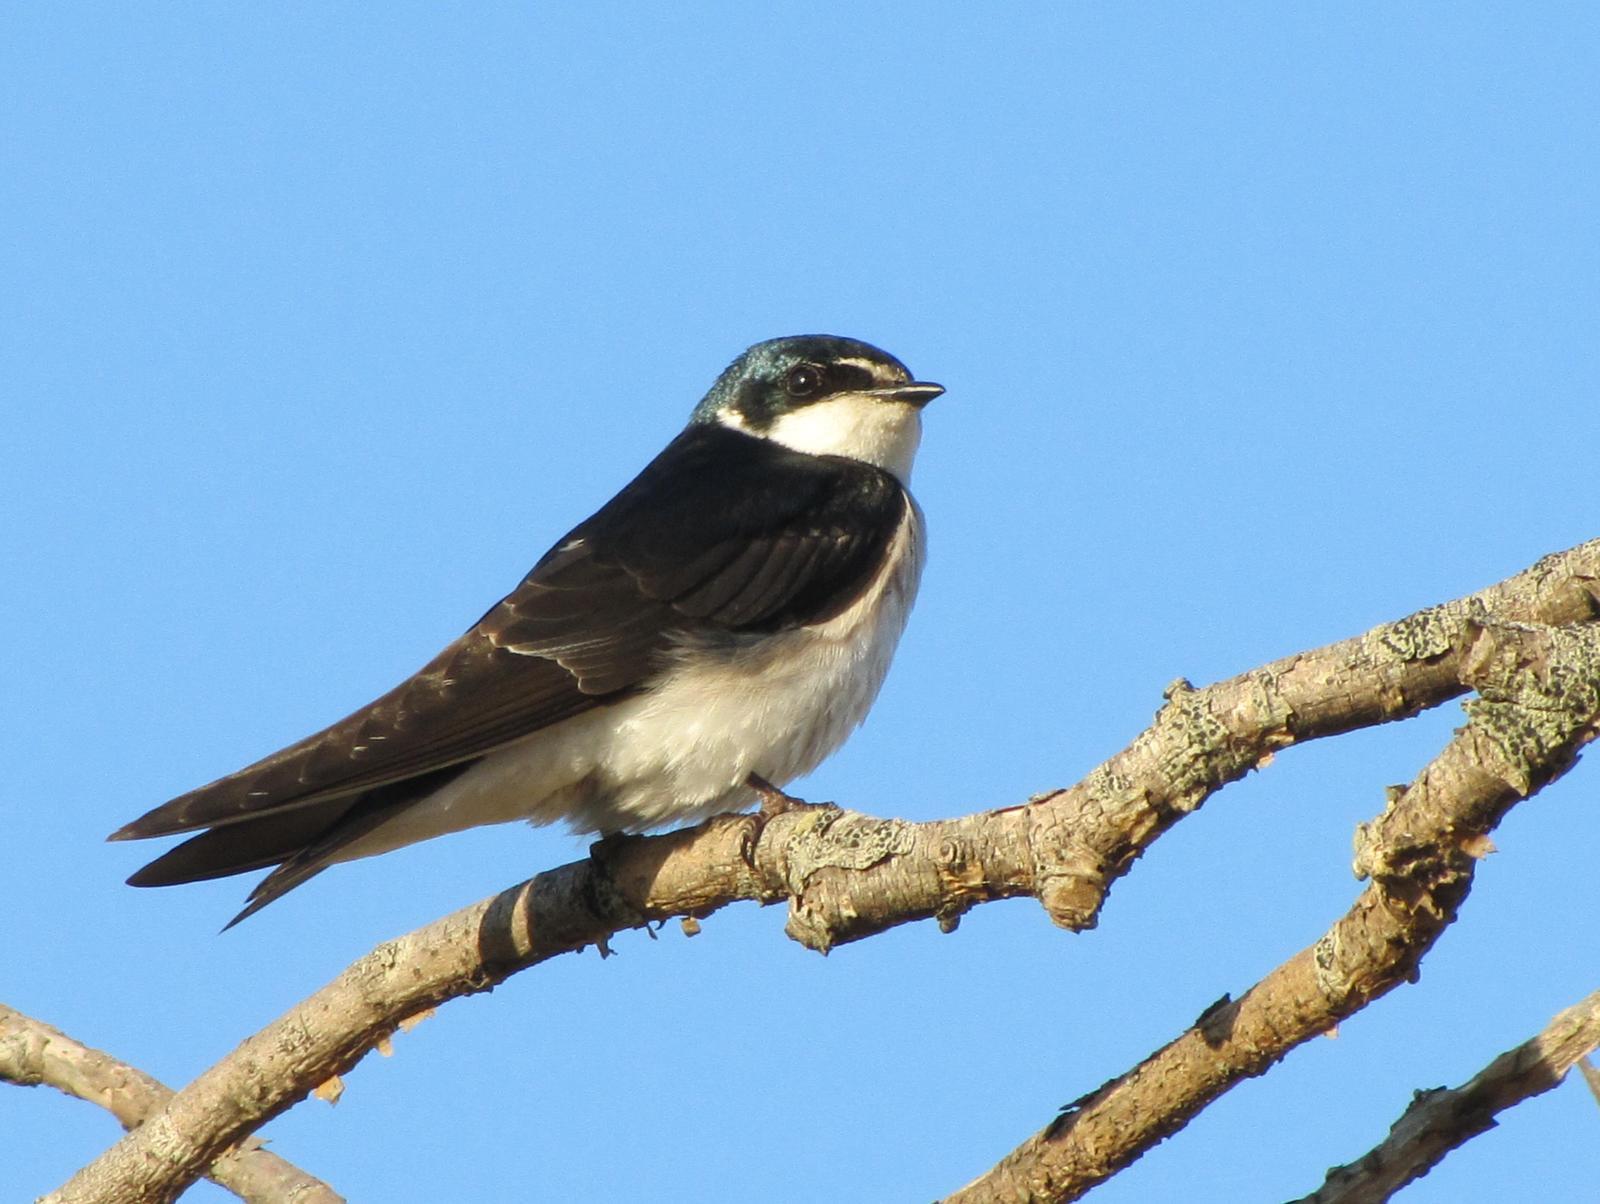 White-rumped Swallow Photo by Jeff Harding